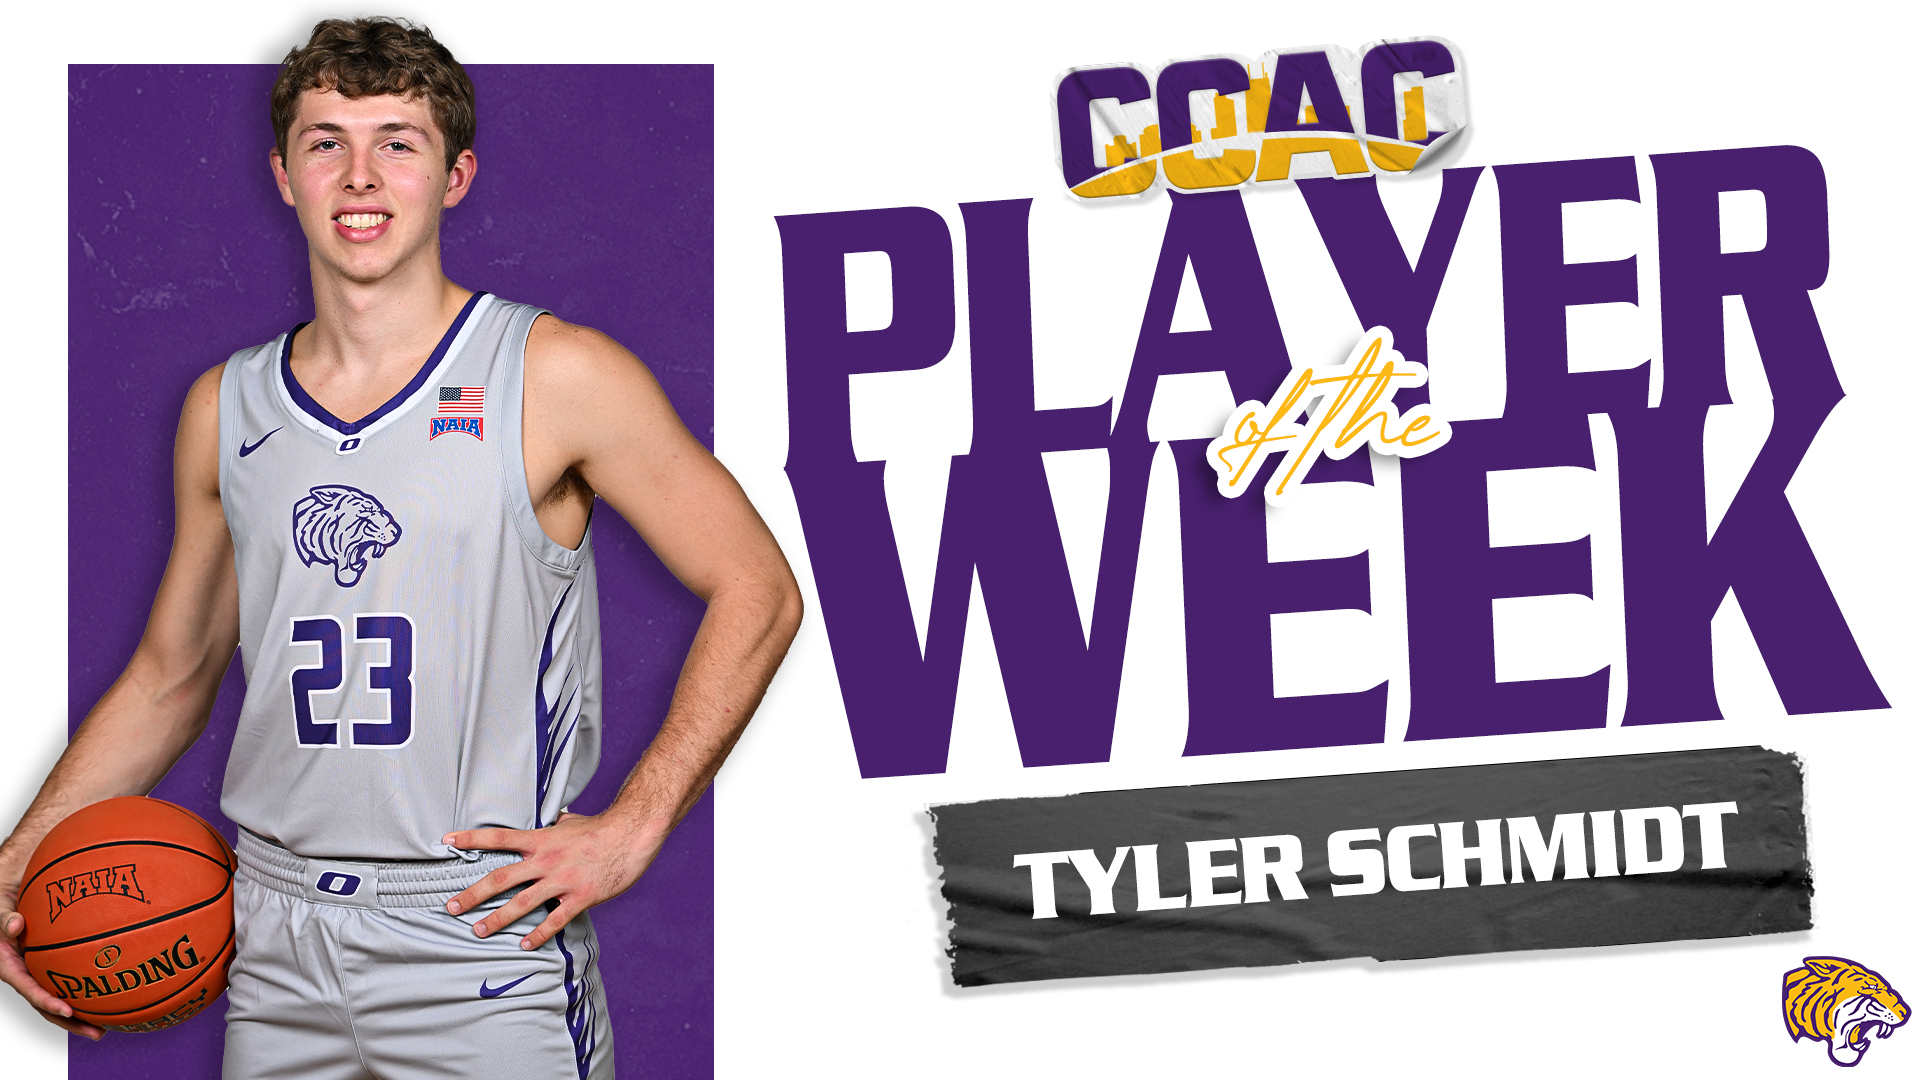 SCHMIDT CAPTURES FOURTH CCAC PLAYER OF THE WEEK AWARD